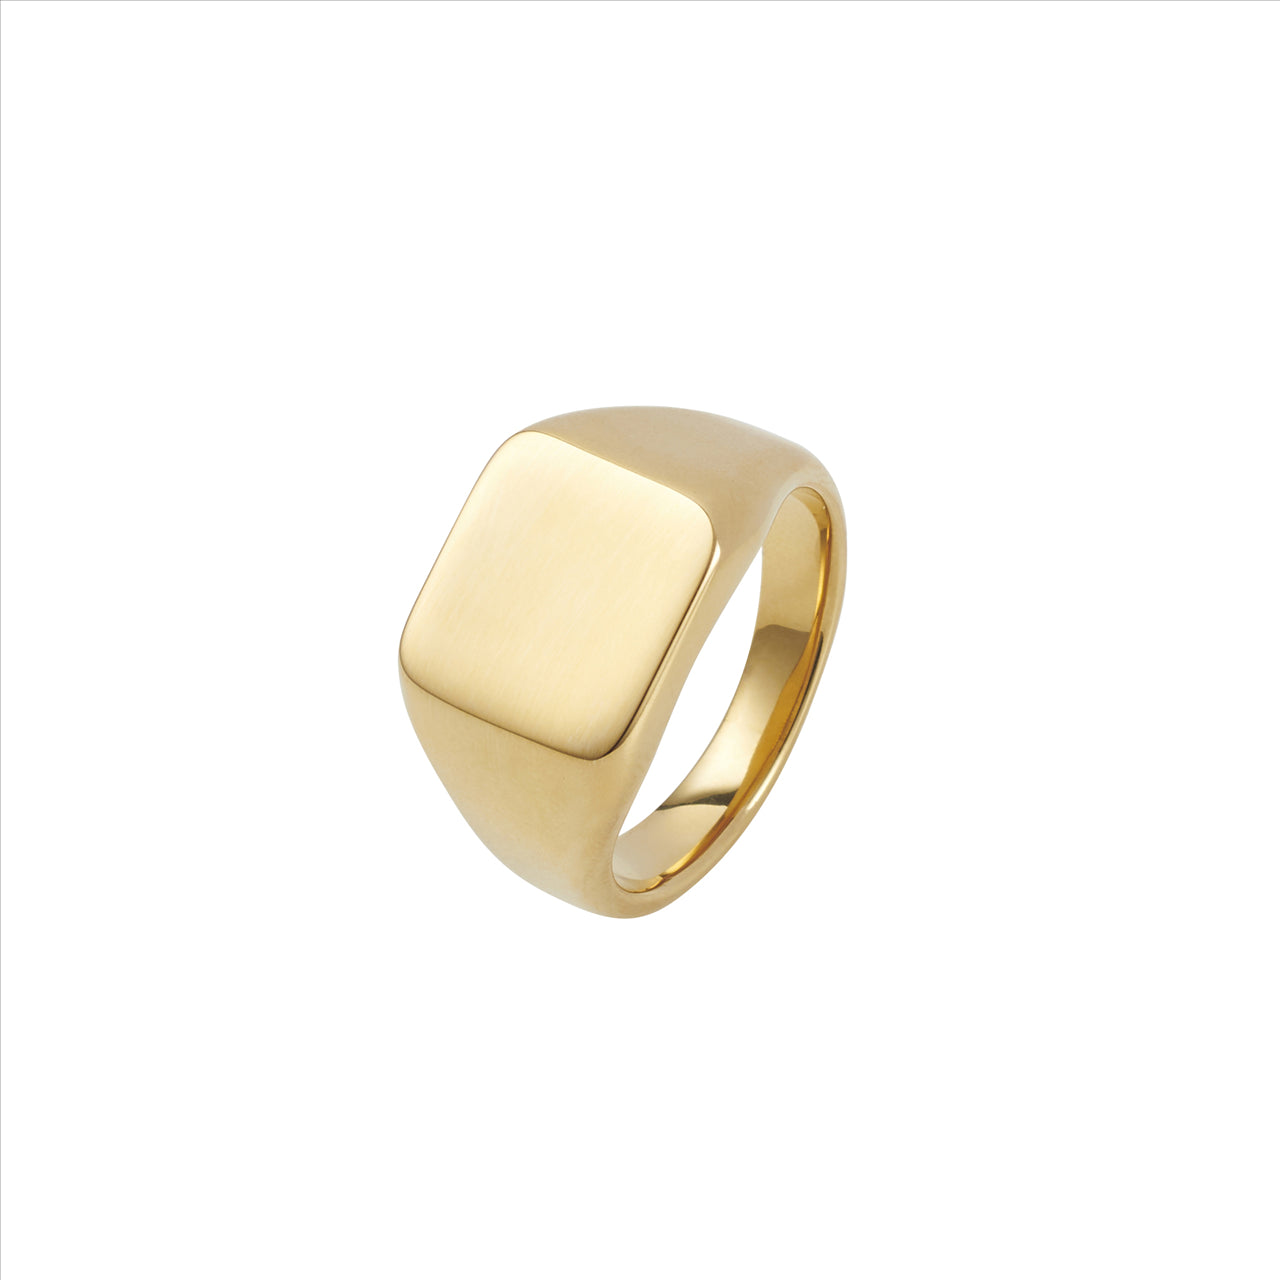 IP 14K Gold Polished Stainless Steel Signet Ring